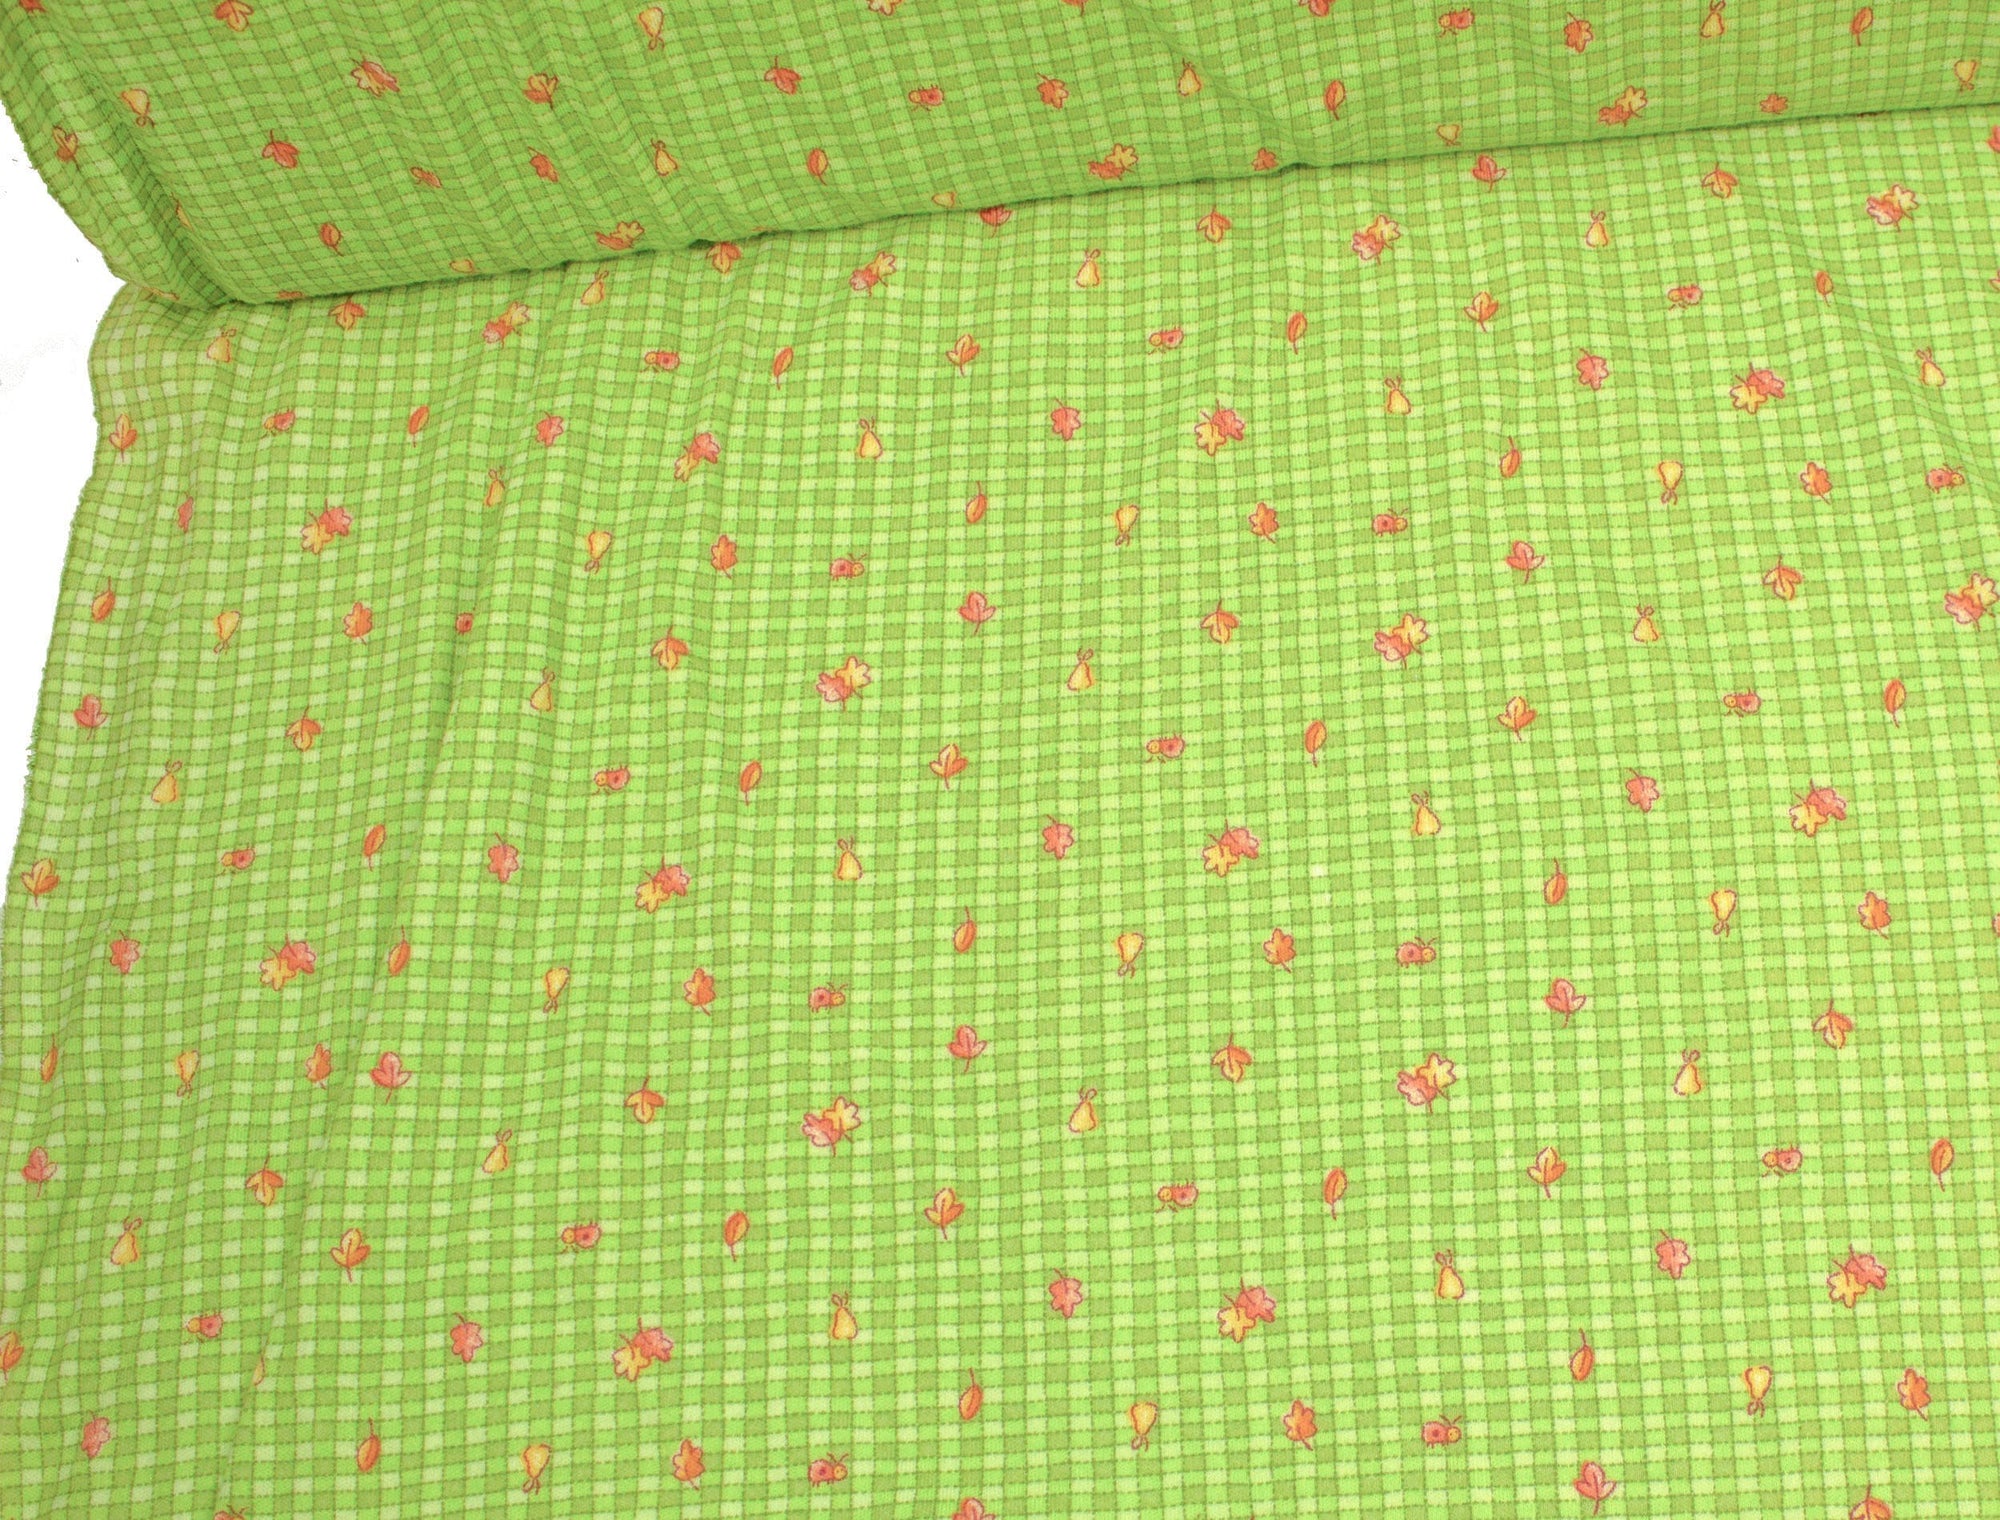 Vintage Fabric Green Gradient Check Cotton Print with Leaves and Pears - Measures 51" x 38"